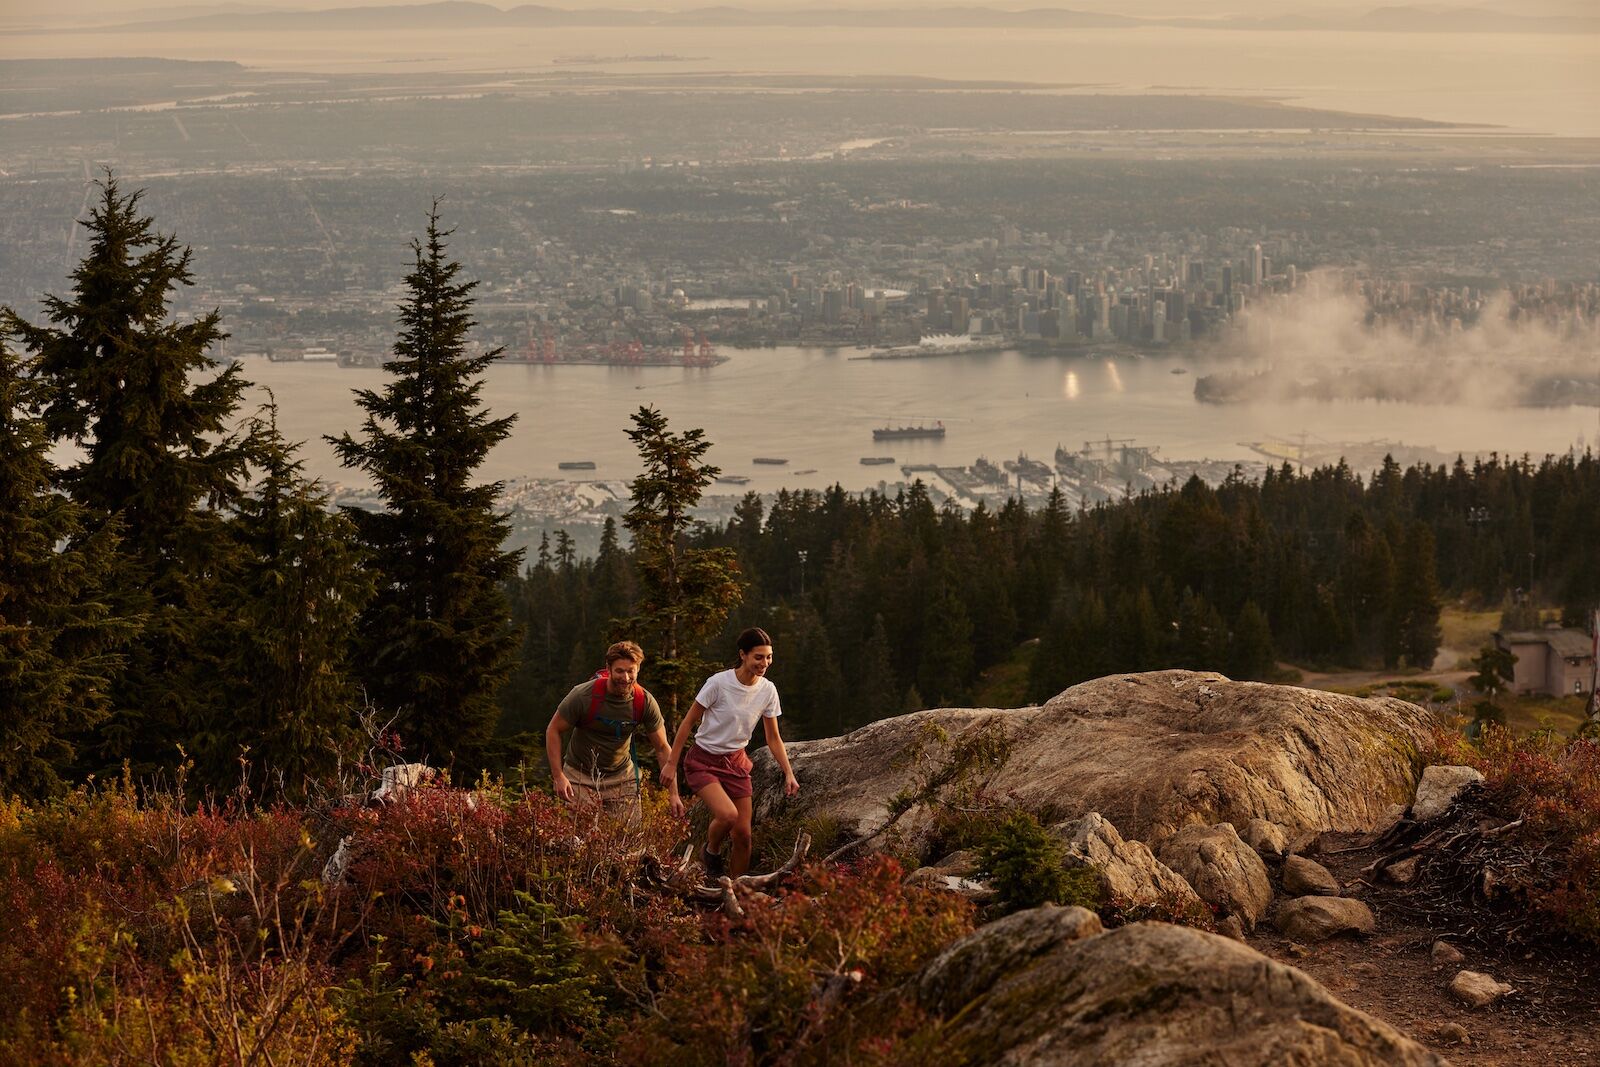 vancouver parks - hikers at grouse mountain